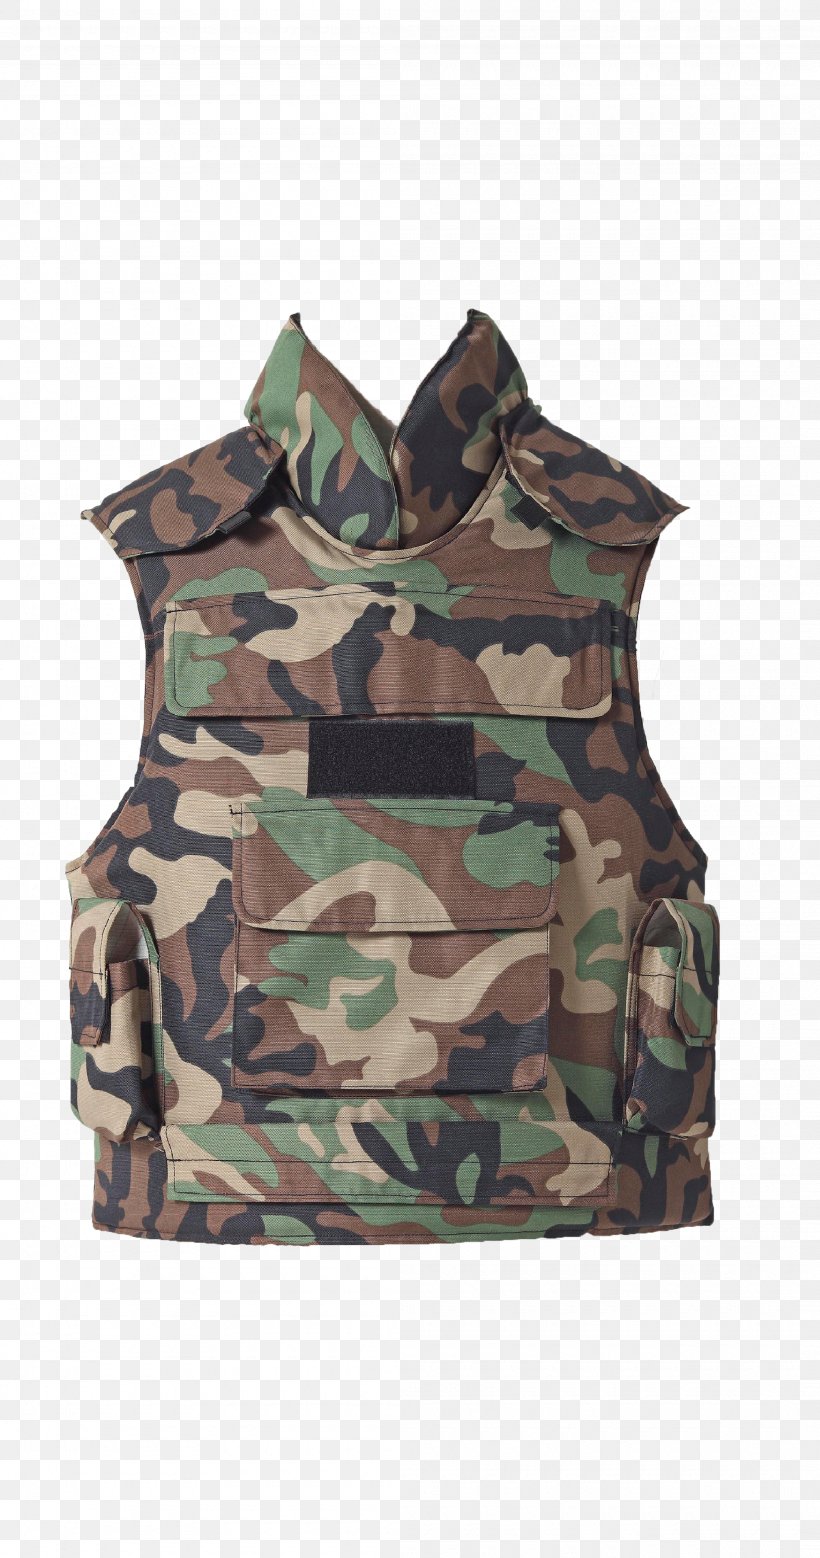 Military Camouflage Bullet Proof Vests Gilets Waistcoat, PNG, 2100x3992px, Military Camouflage, Ballistic Vest, Ballistics, Bullet Proof Vests, Camouflage Download Free